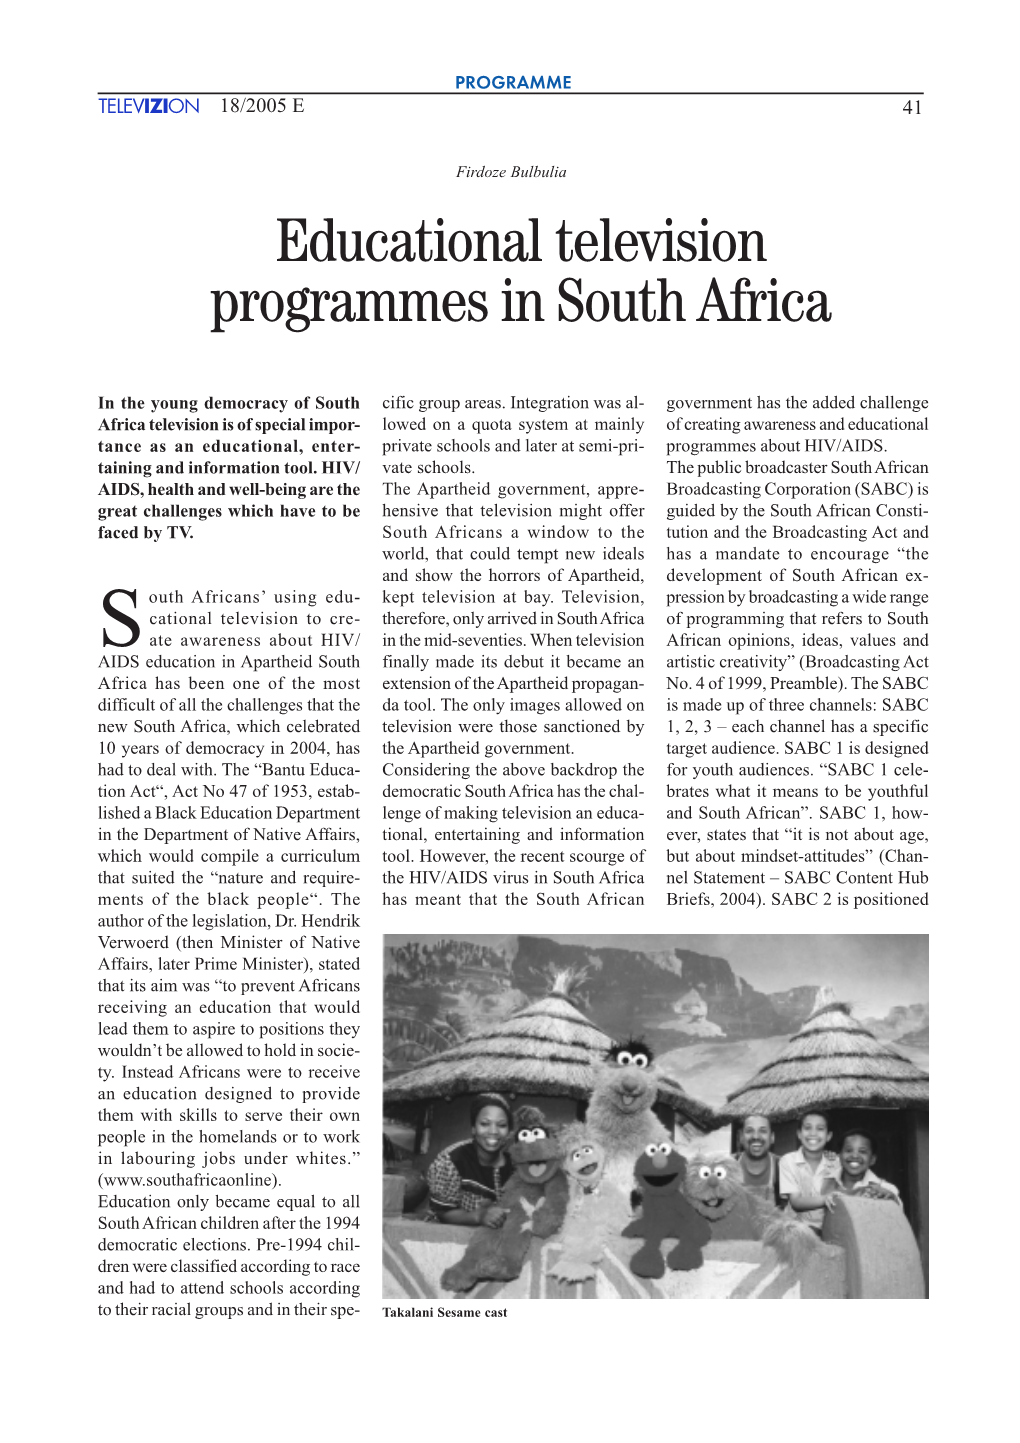 Educational Television Programmes in South Africa